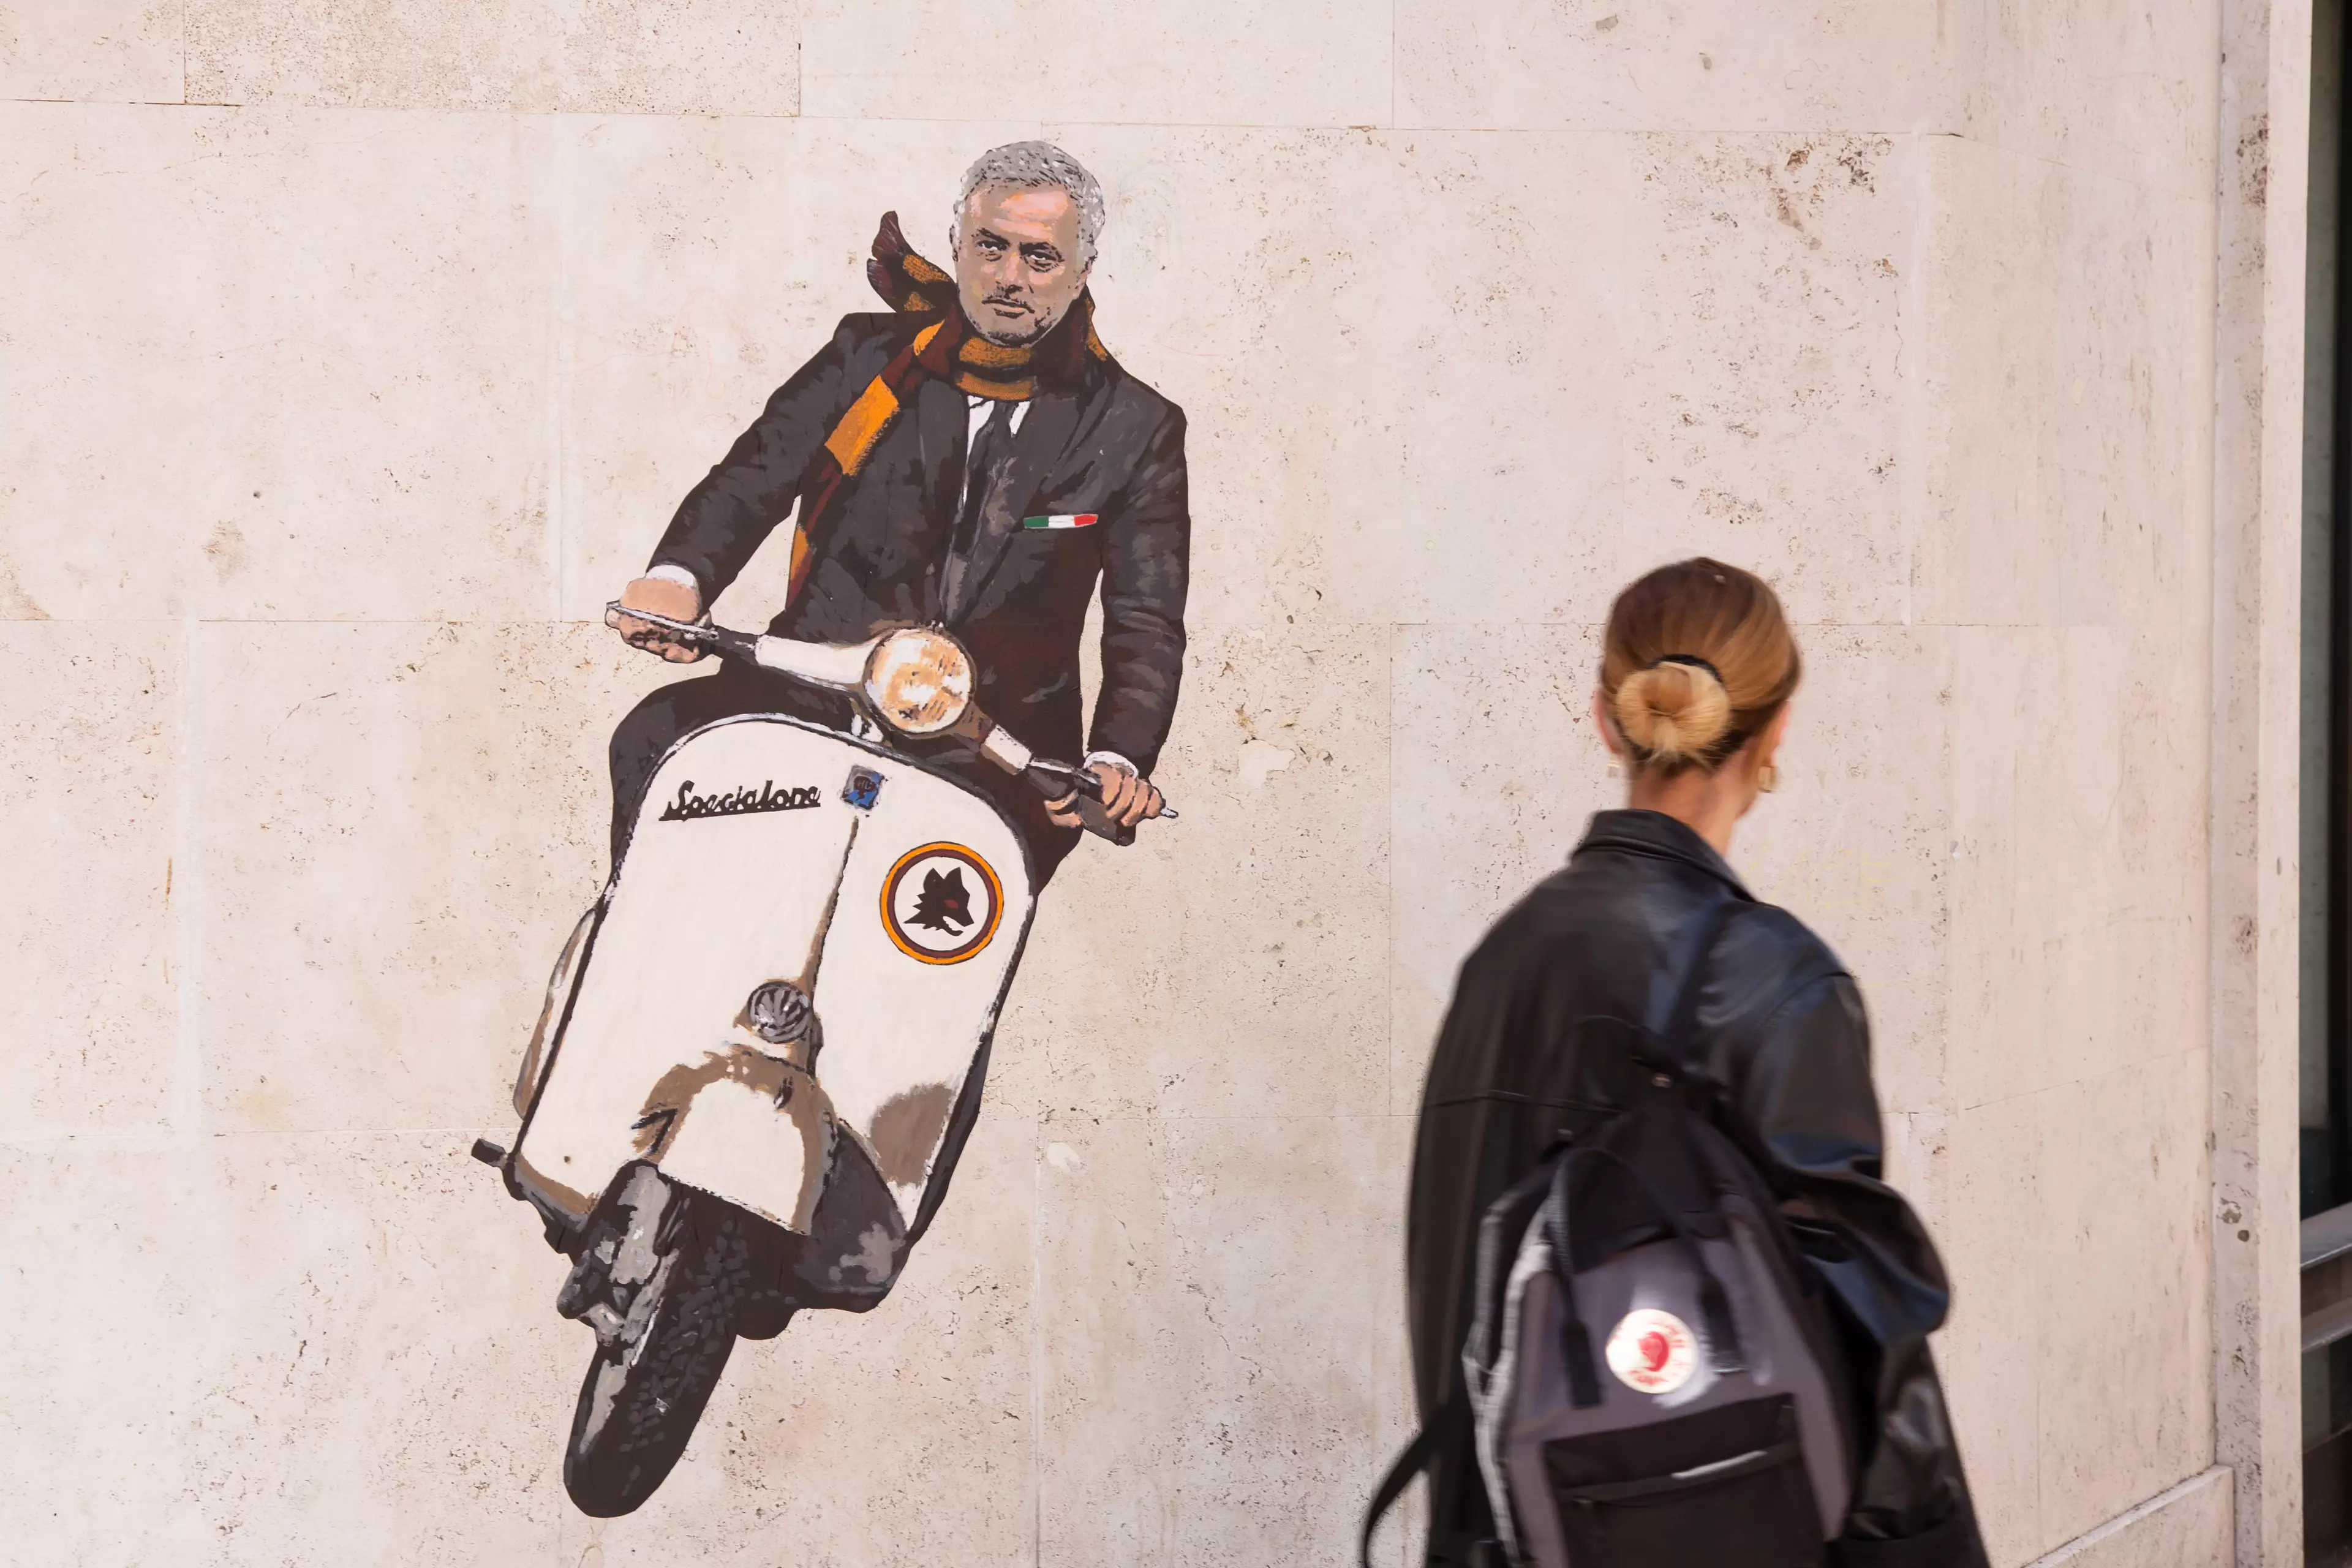 A mural of Mourinho has already appeared in Rome. Image: PA Images